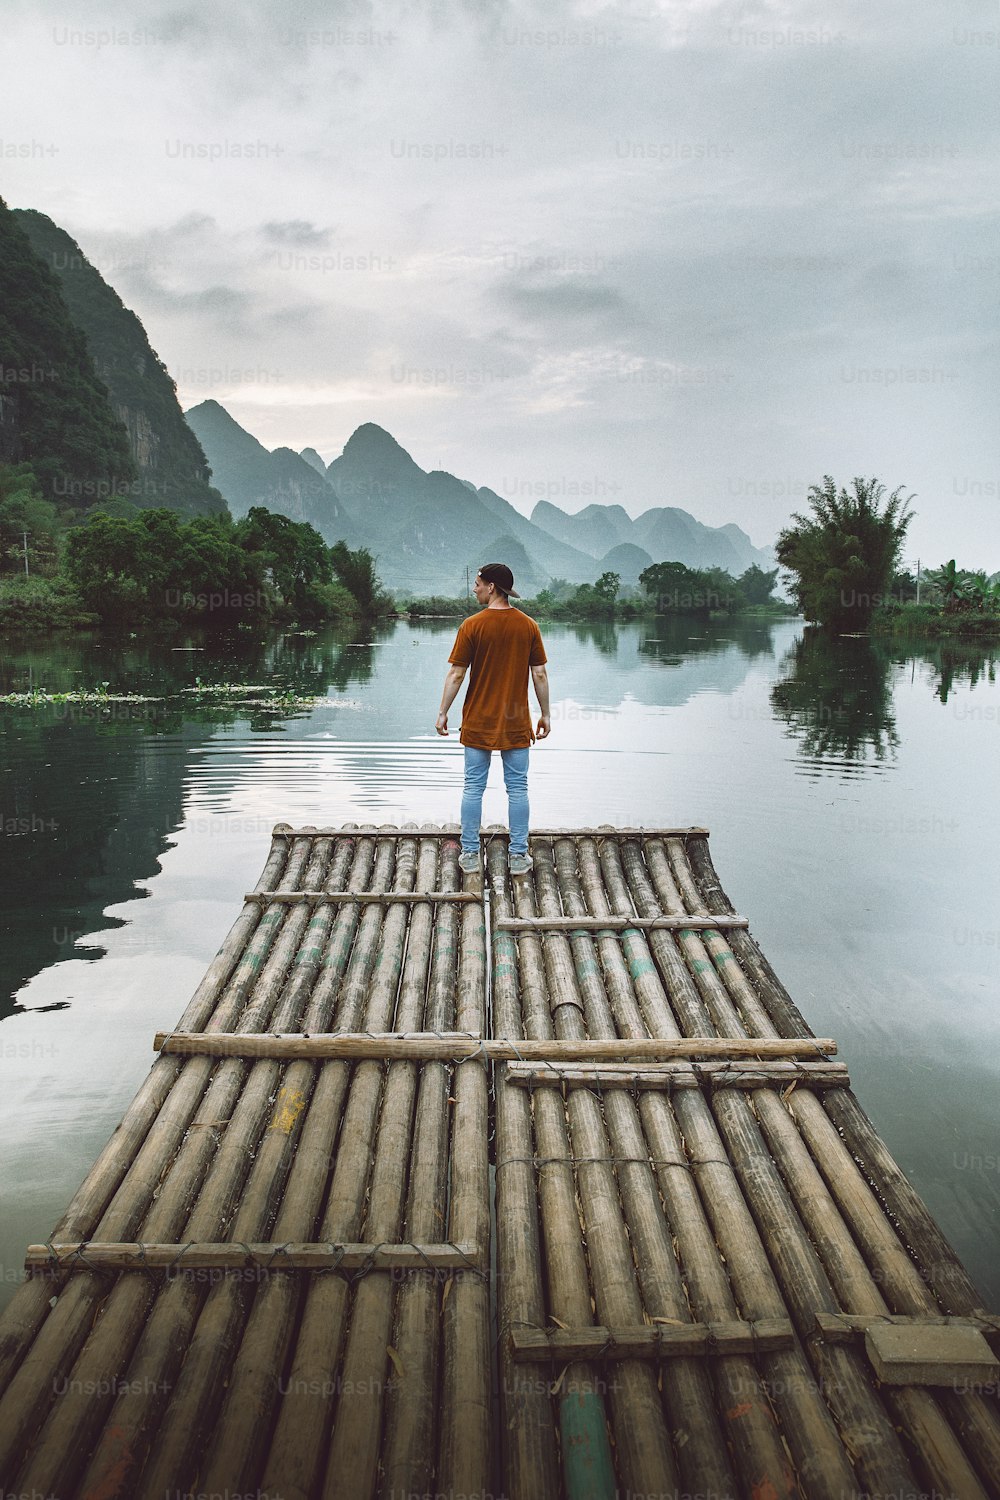 a person standing on a bamboo raft in the middle of a body of water